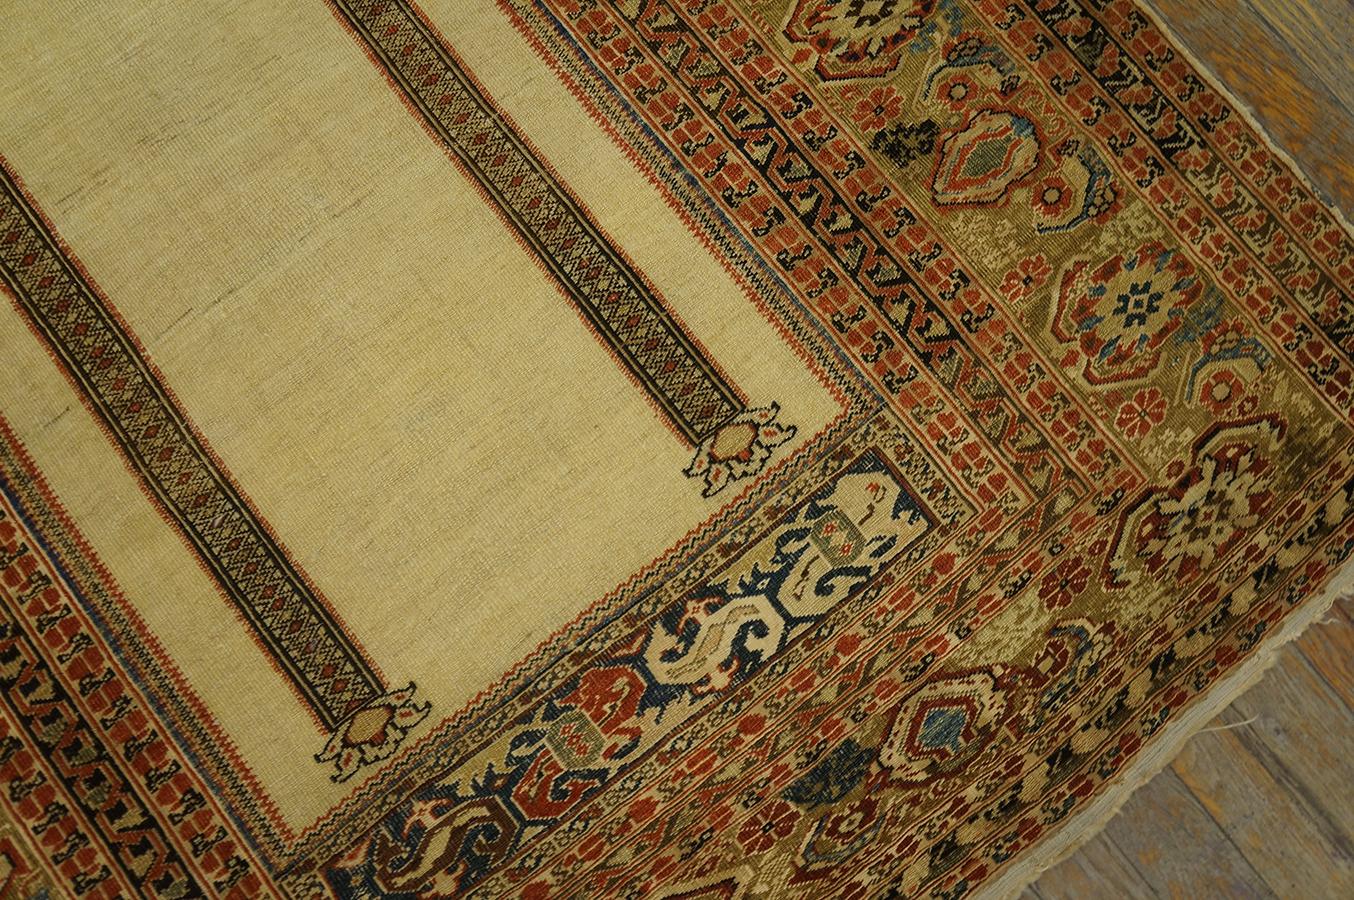 Mid 18th Century Turkish Ghiordes Prayer Carpet ( 3' 10' x 5' - 117 x 153 cm) In Good Condition For Sale In New York, NY